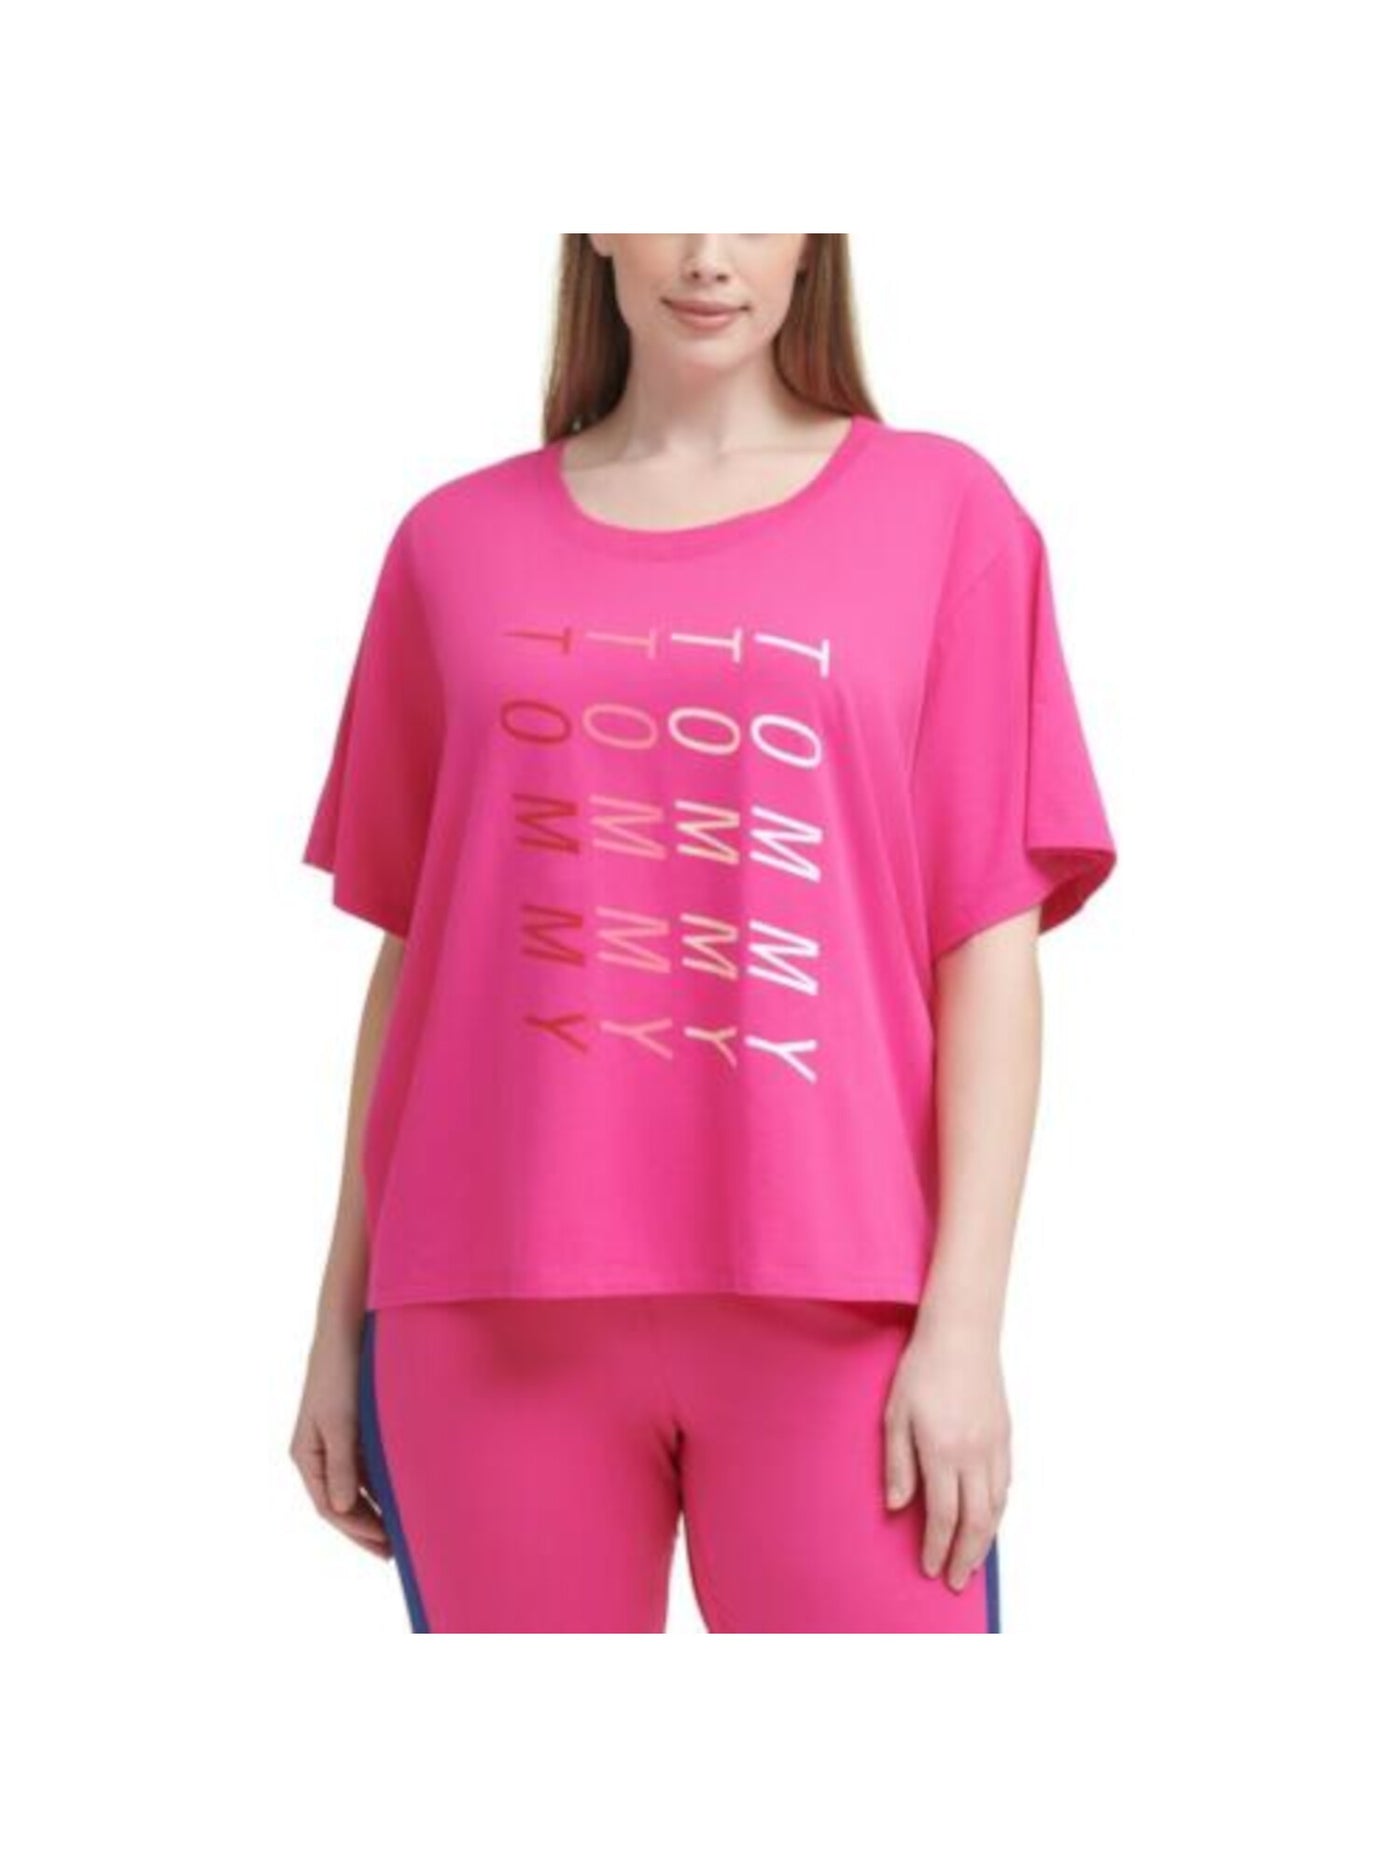 TOMMY HILFIGER SPORT Womens Pink Ribbed Short Length Oversized Fit Short Sleeve Scoop Neck T-Shirt Plus 2X